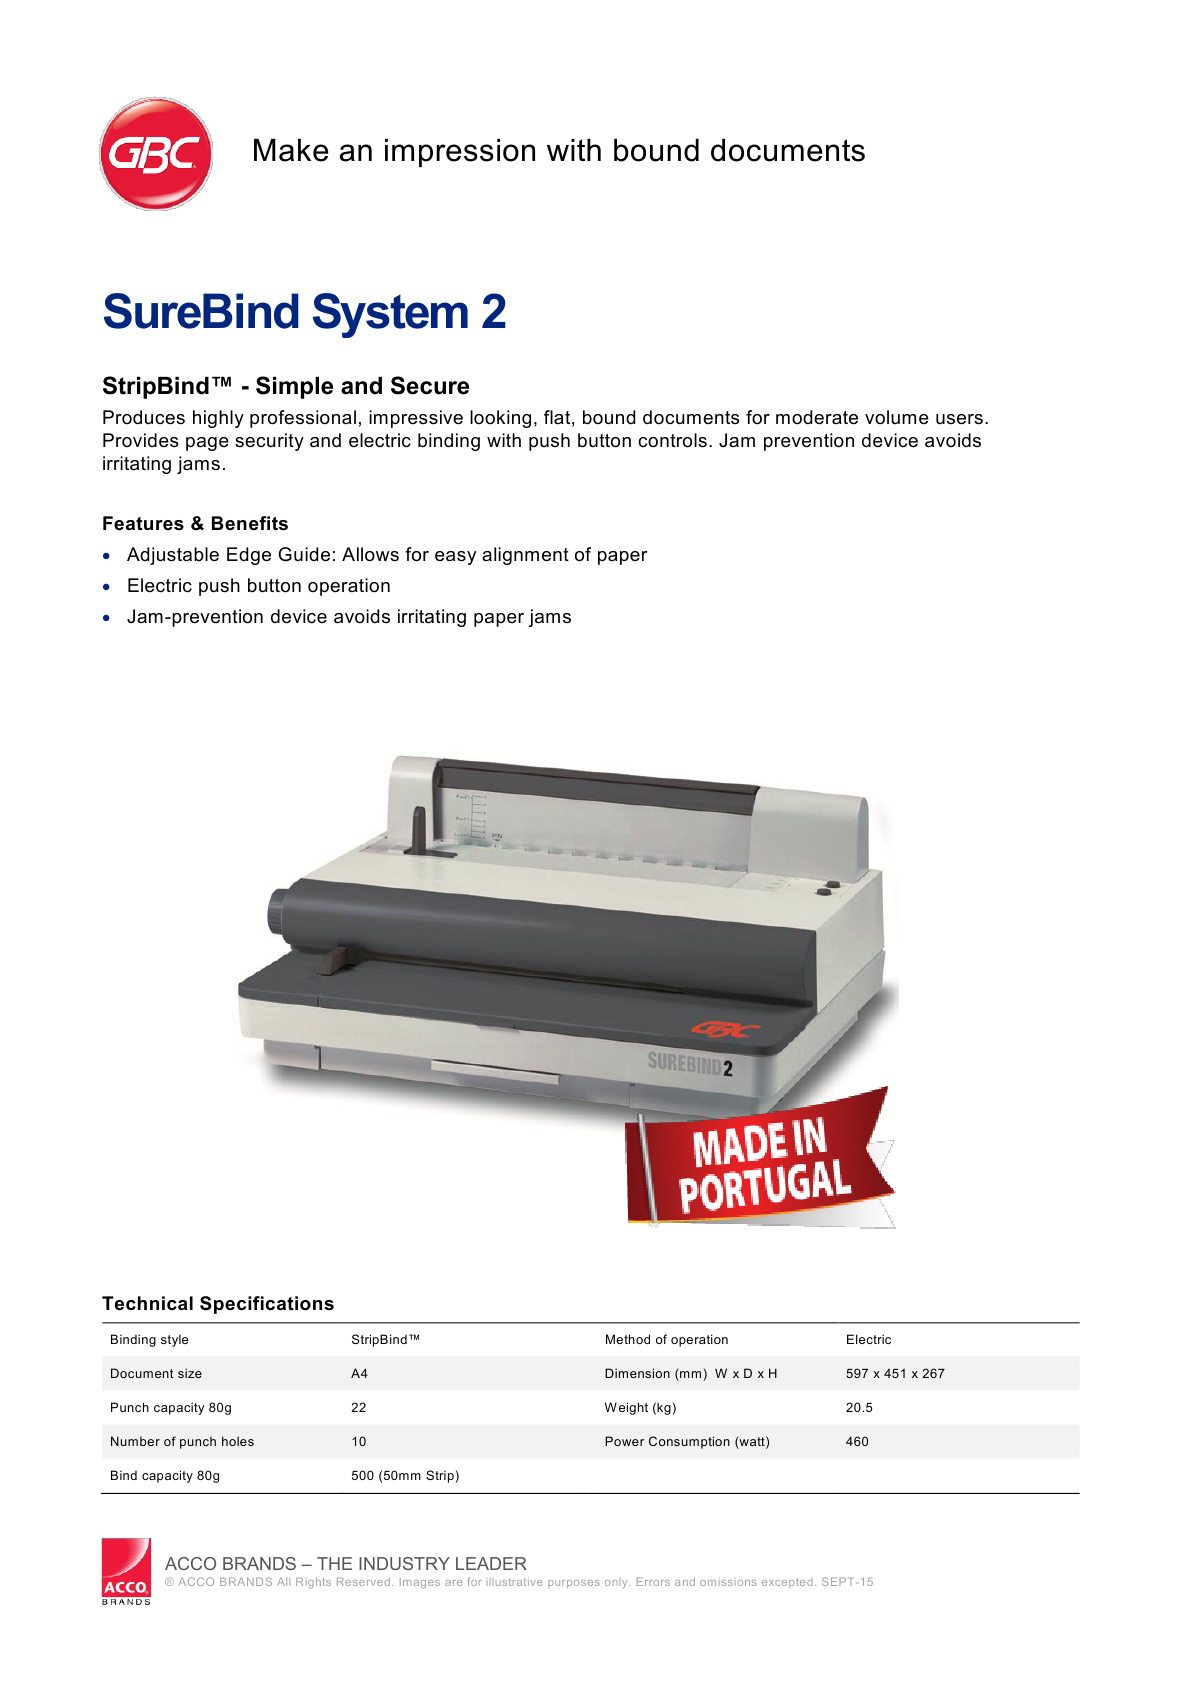 datasheet-surebind-sys2..<p><strong>Price: $23,980.00</strong> </p>]]></content>
		<draft xmlns=